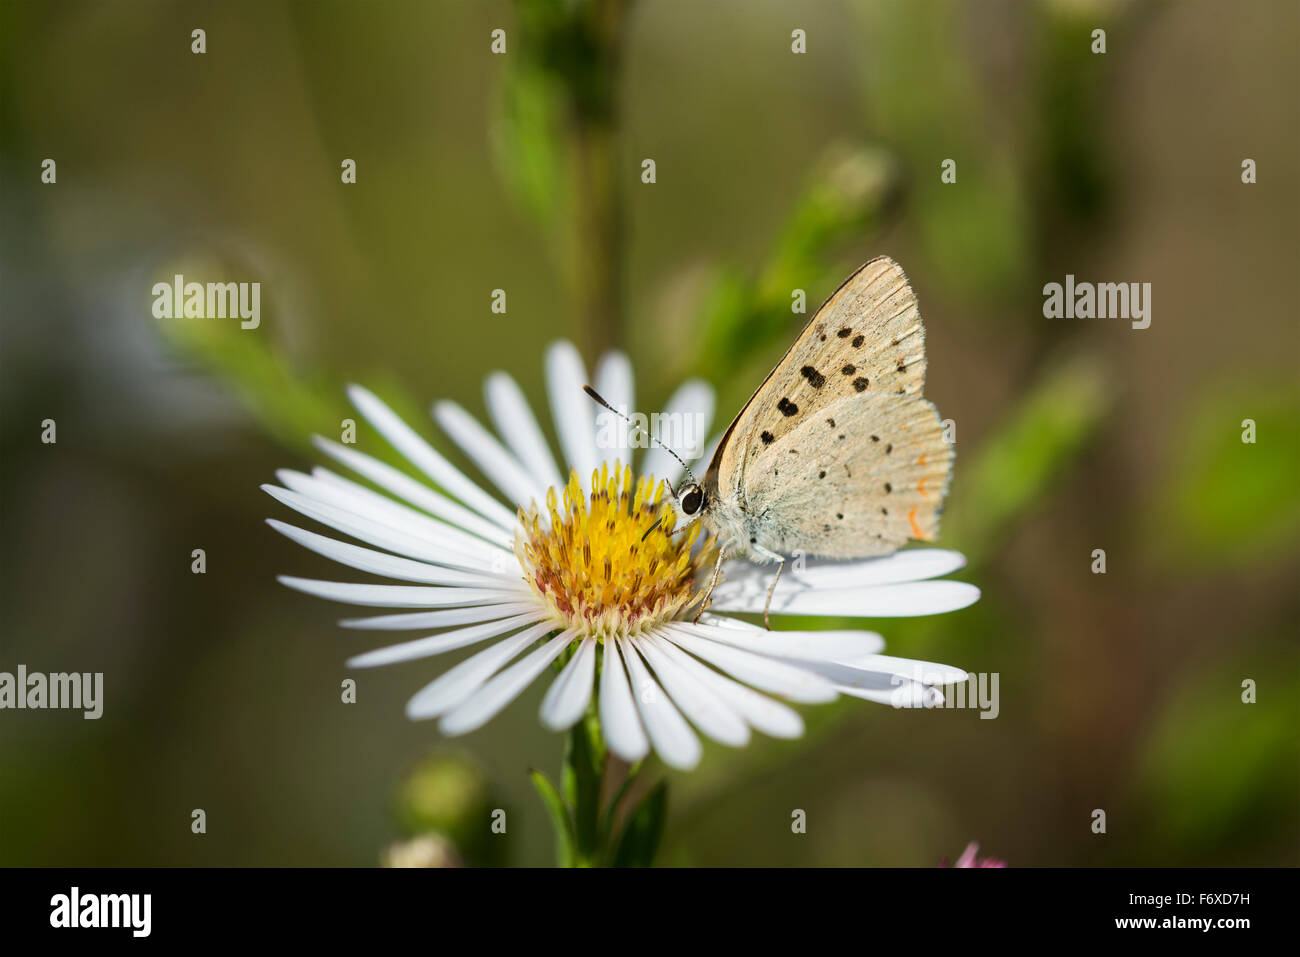 Copper Butterfly (Lycaenidae) seeks nectar from aster blossoms; Astoria, Oregon, United States of America Stock Photo